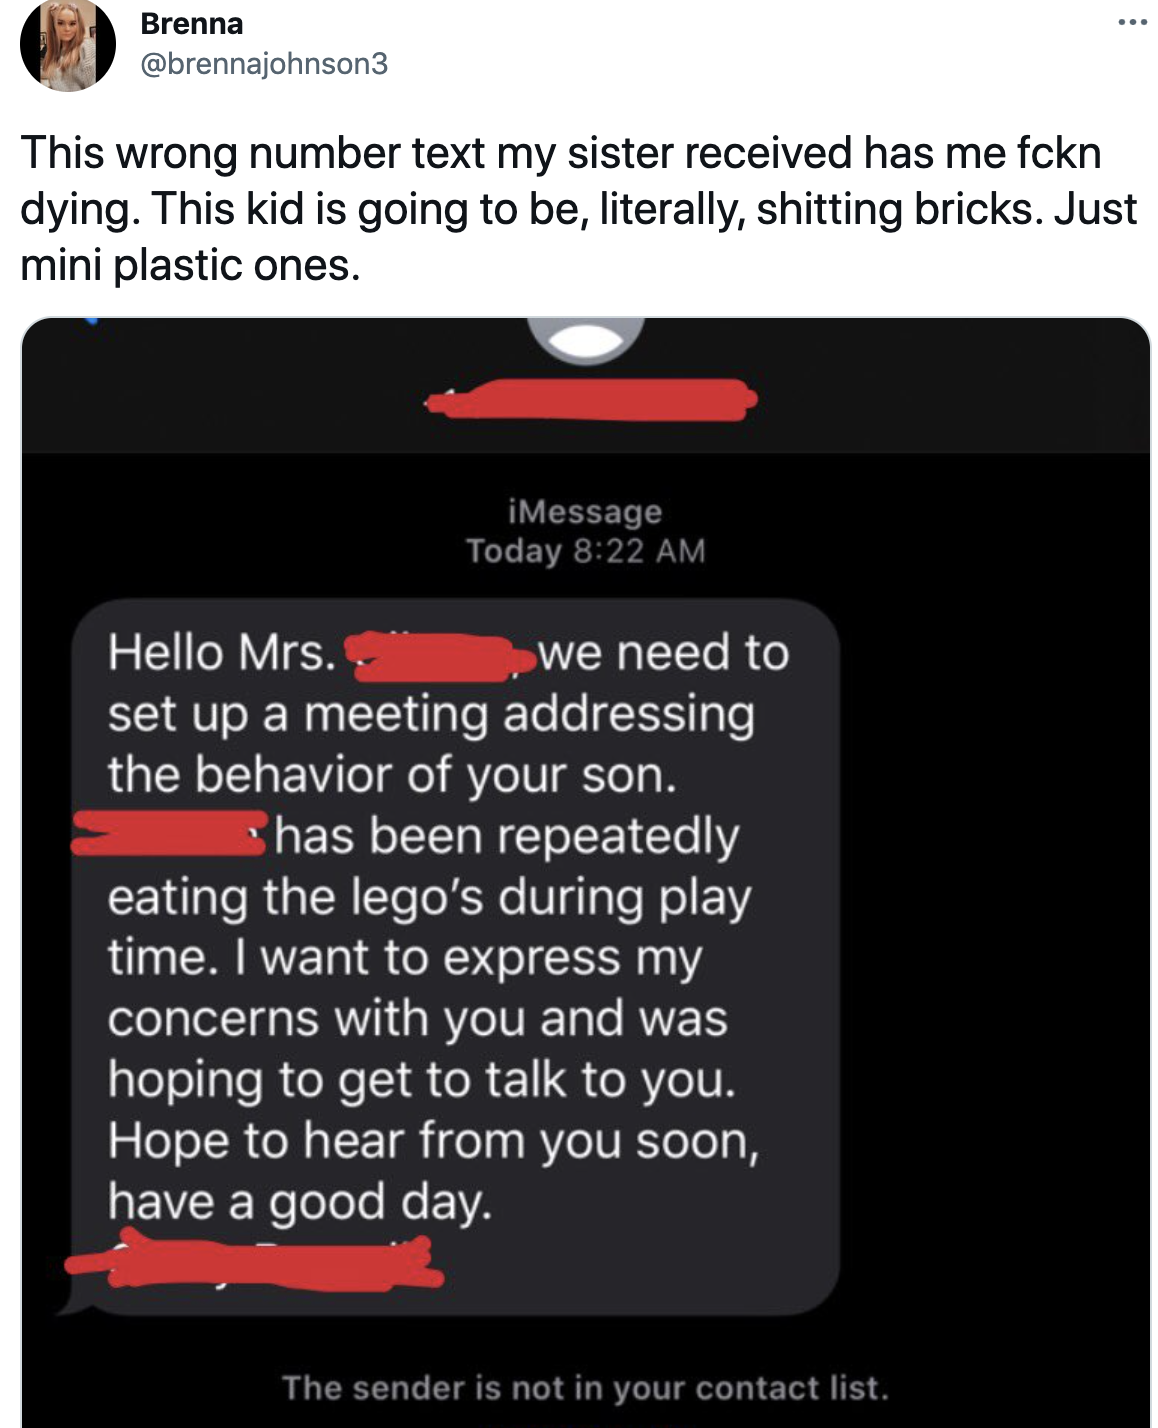 wrong number text from someone whose kid is eating legos